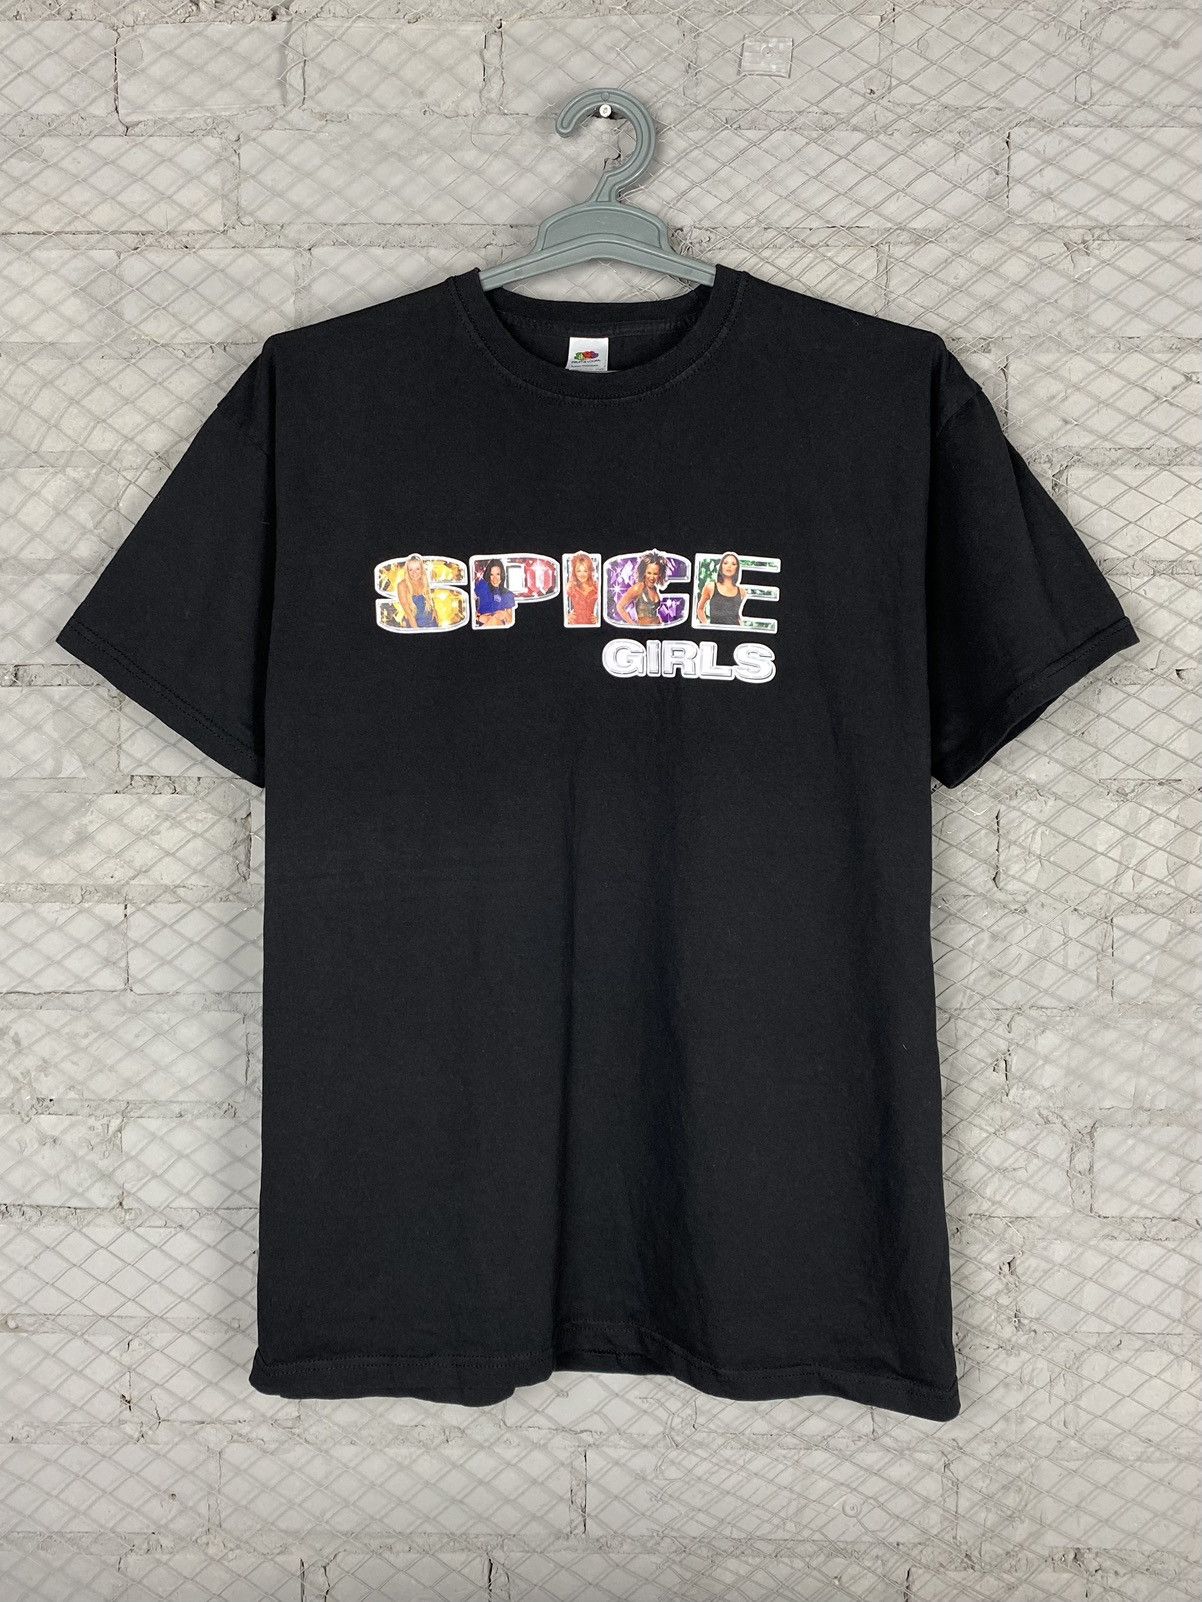 Pre-owned Band Tees X Vintage Y2k Spice Girls T Shirt In Black